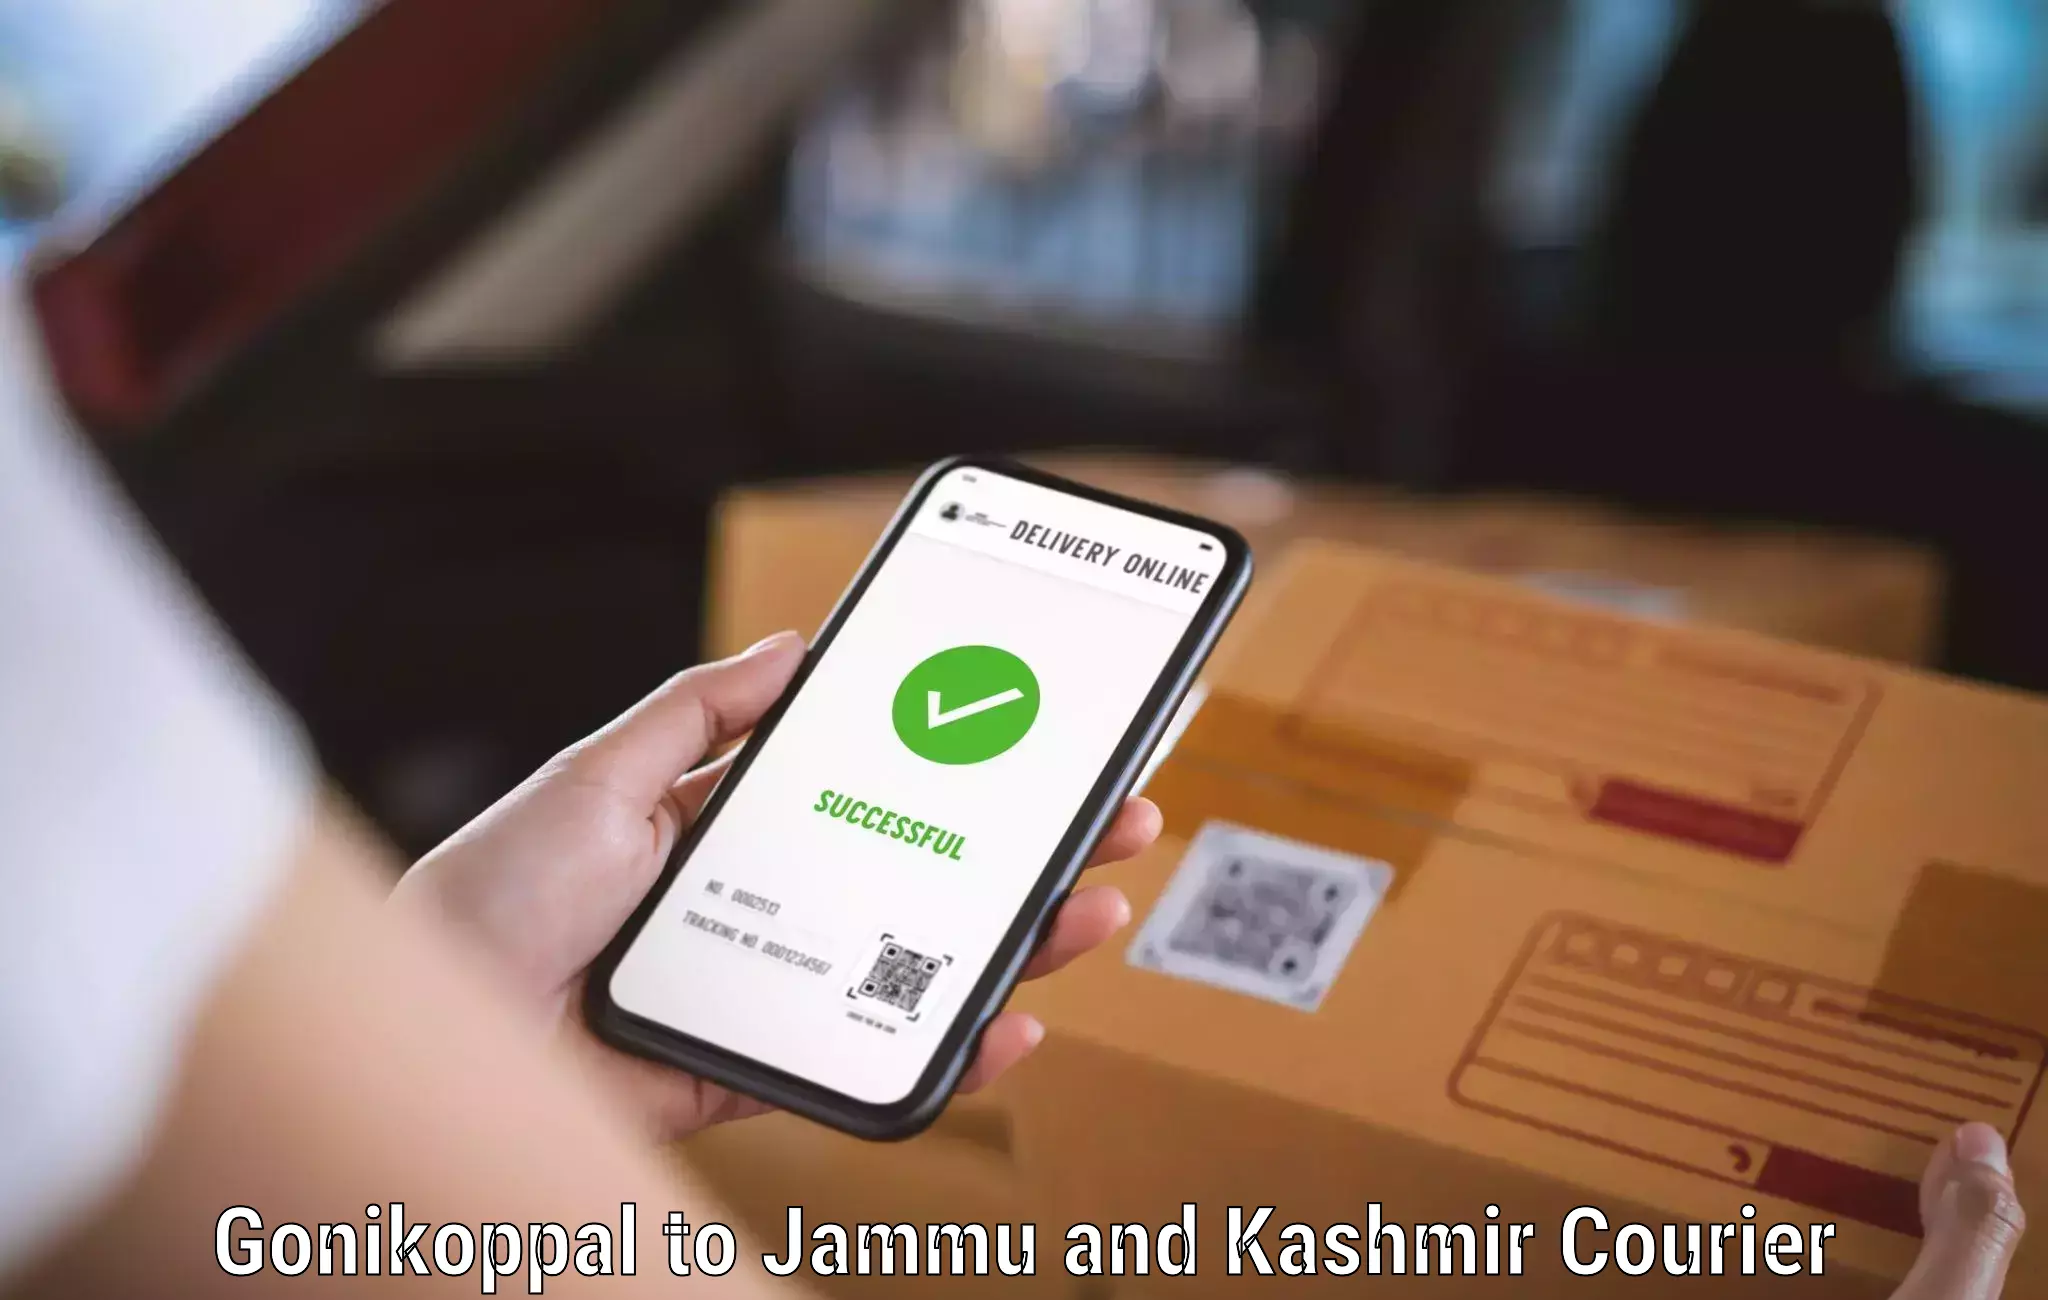 Nationwide courier service Gonikoppal to University of Jammu